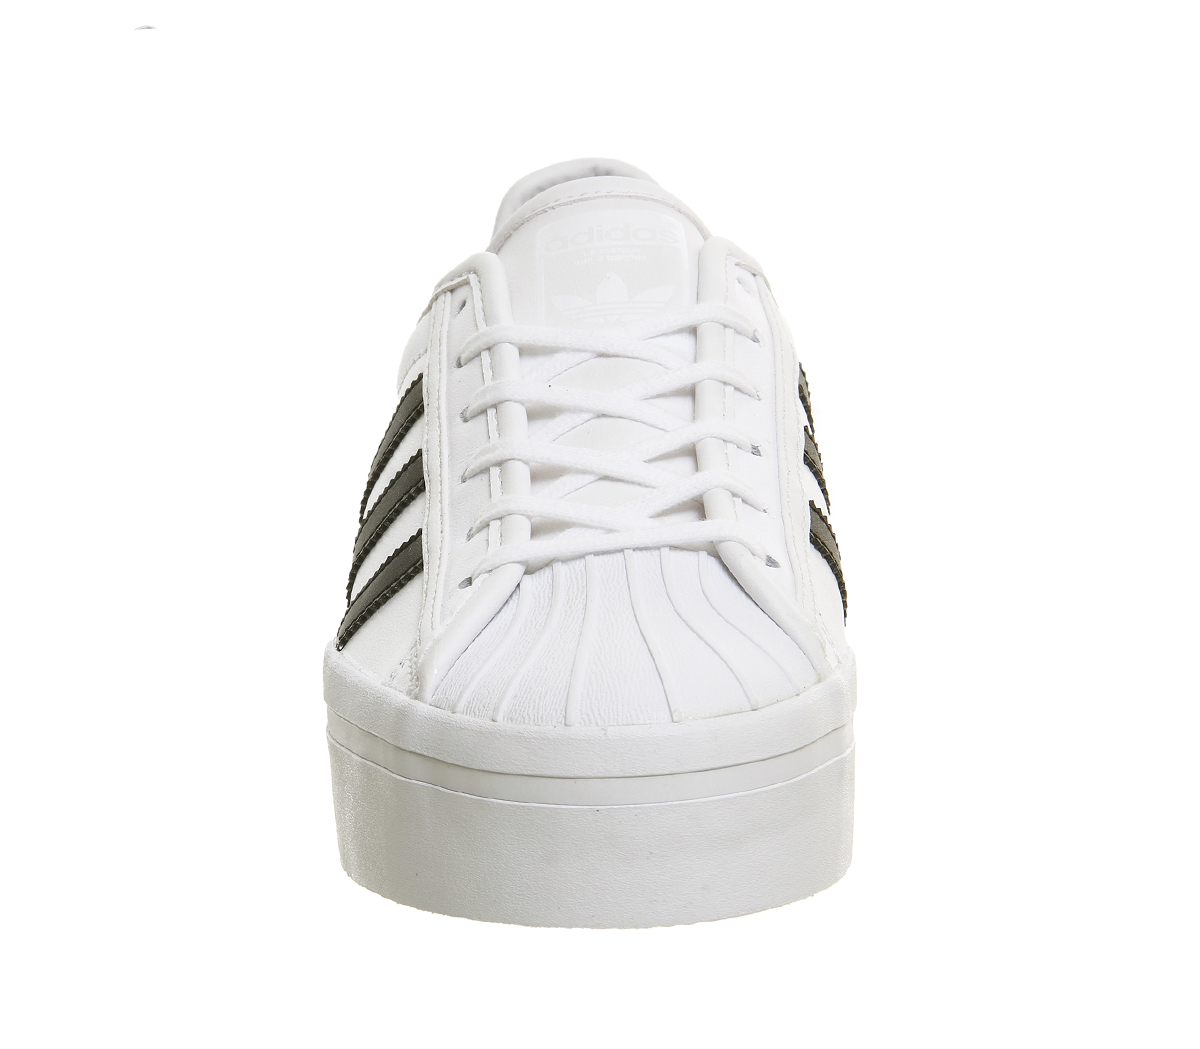 adidas Superstar Rize (w) White Core Black White - Hers trainers